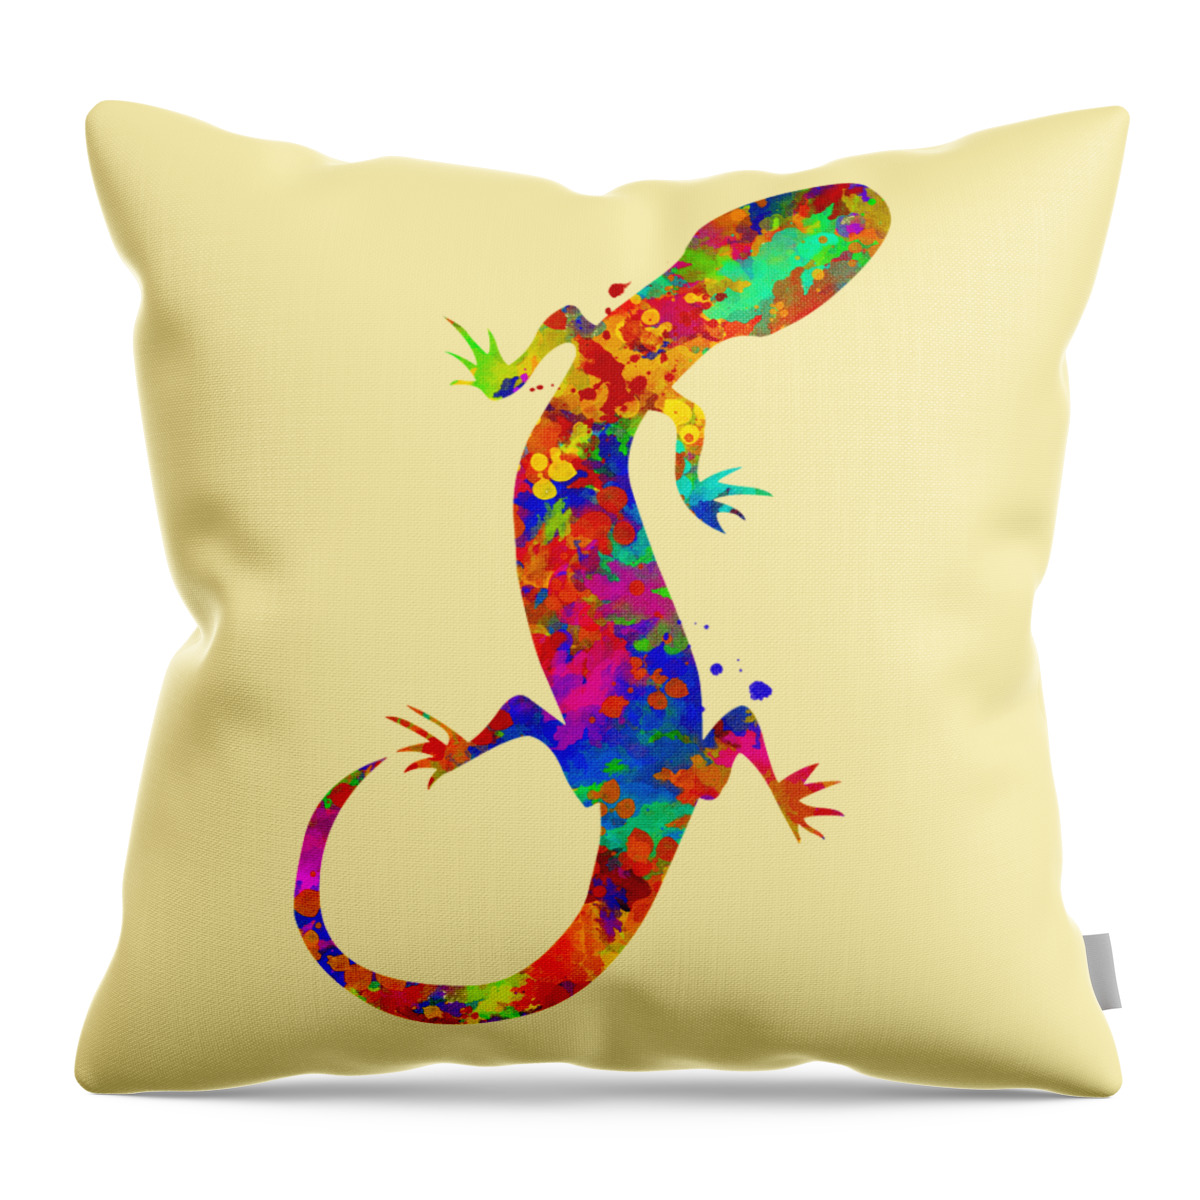 Gecko Throw Pillow featuring the mixed media Gecko Watercolor Art by Christina Rollo